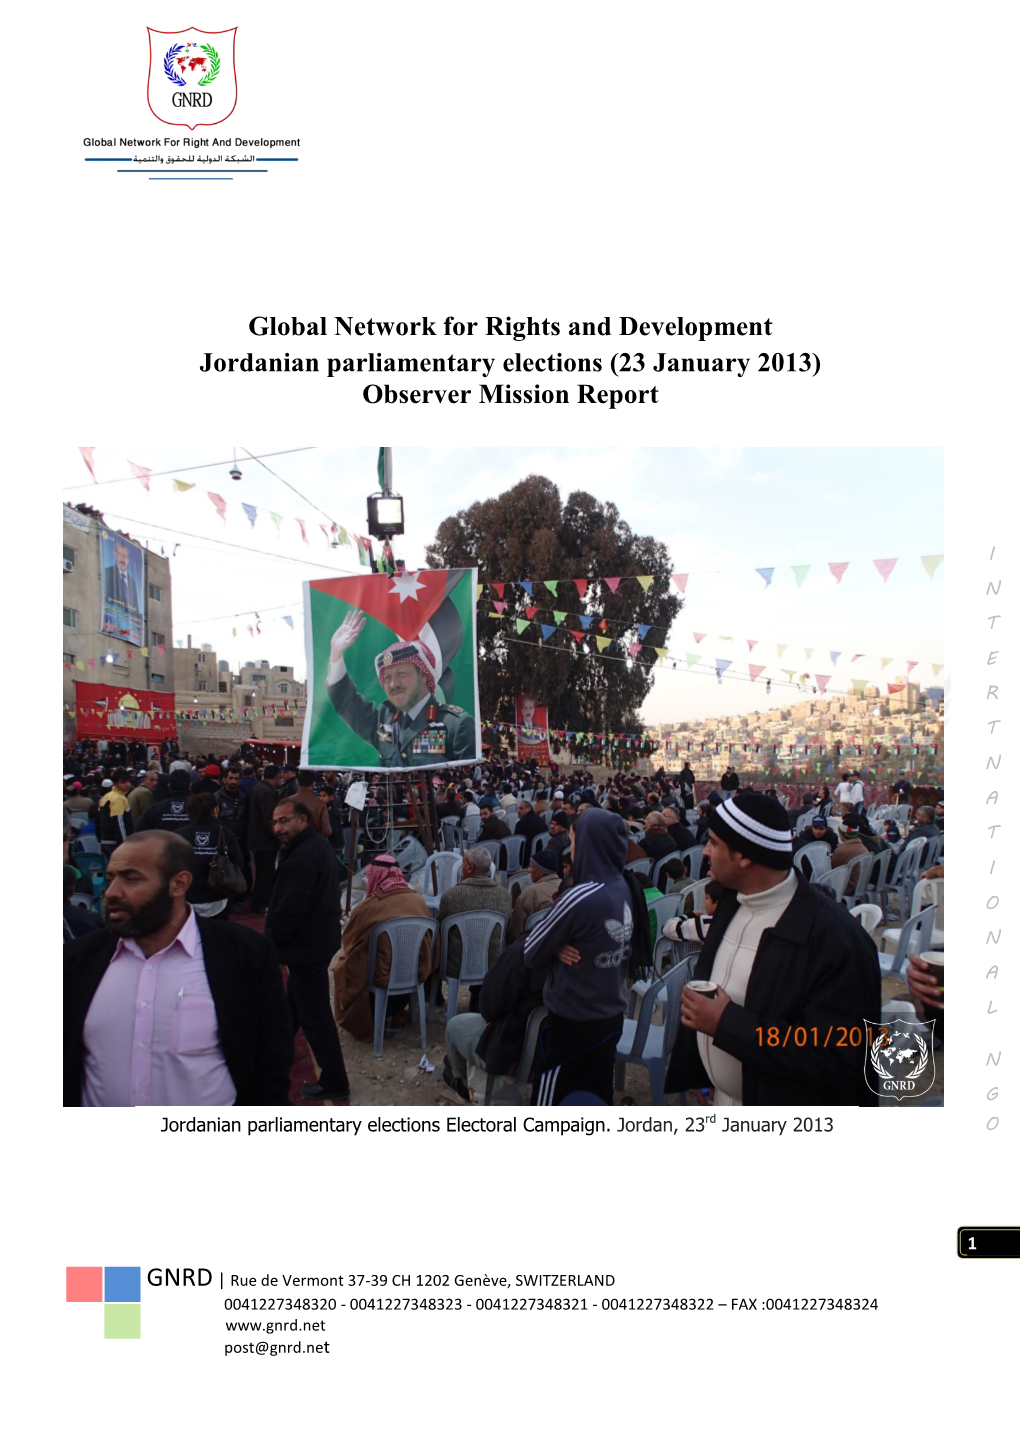 Global Network for Rights and Development Jordanian Parliamentary Elections (23 January 2013) Observer Mission Report